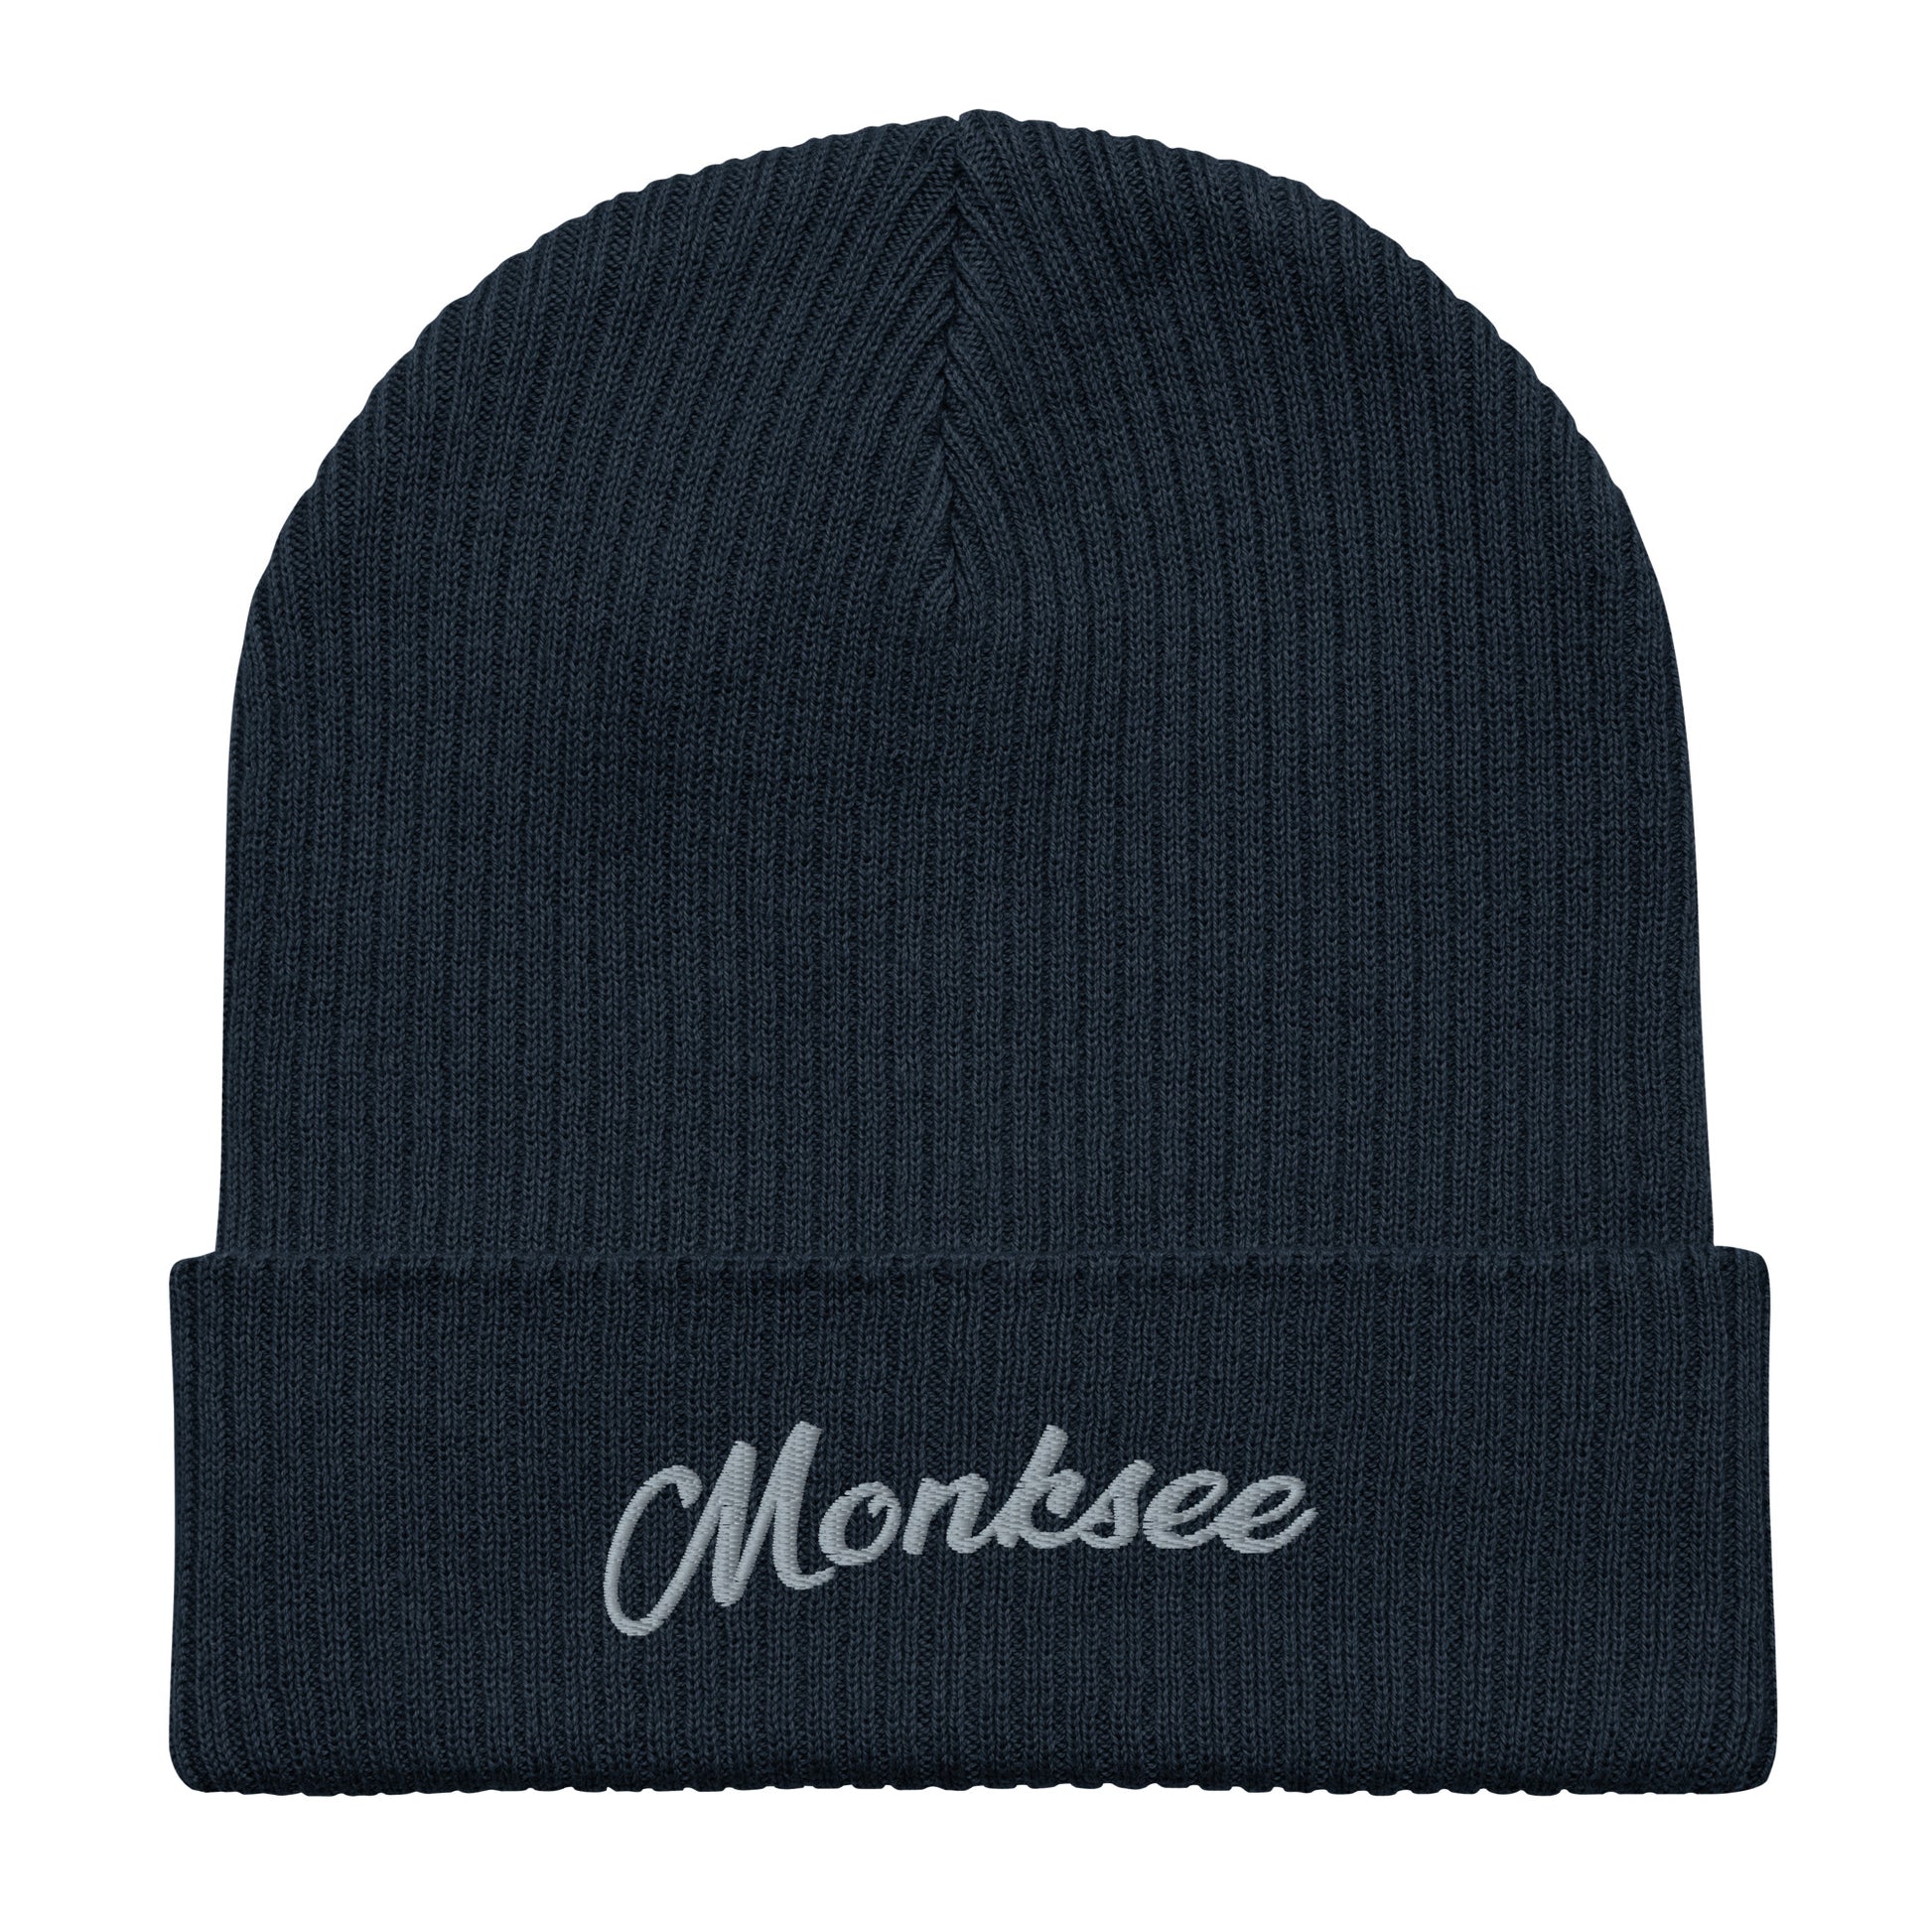 Navy Organic ribbed beanie by Monksee.